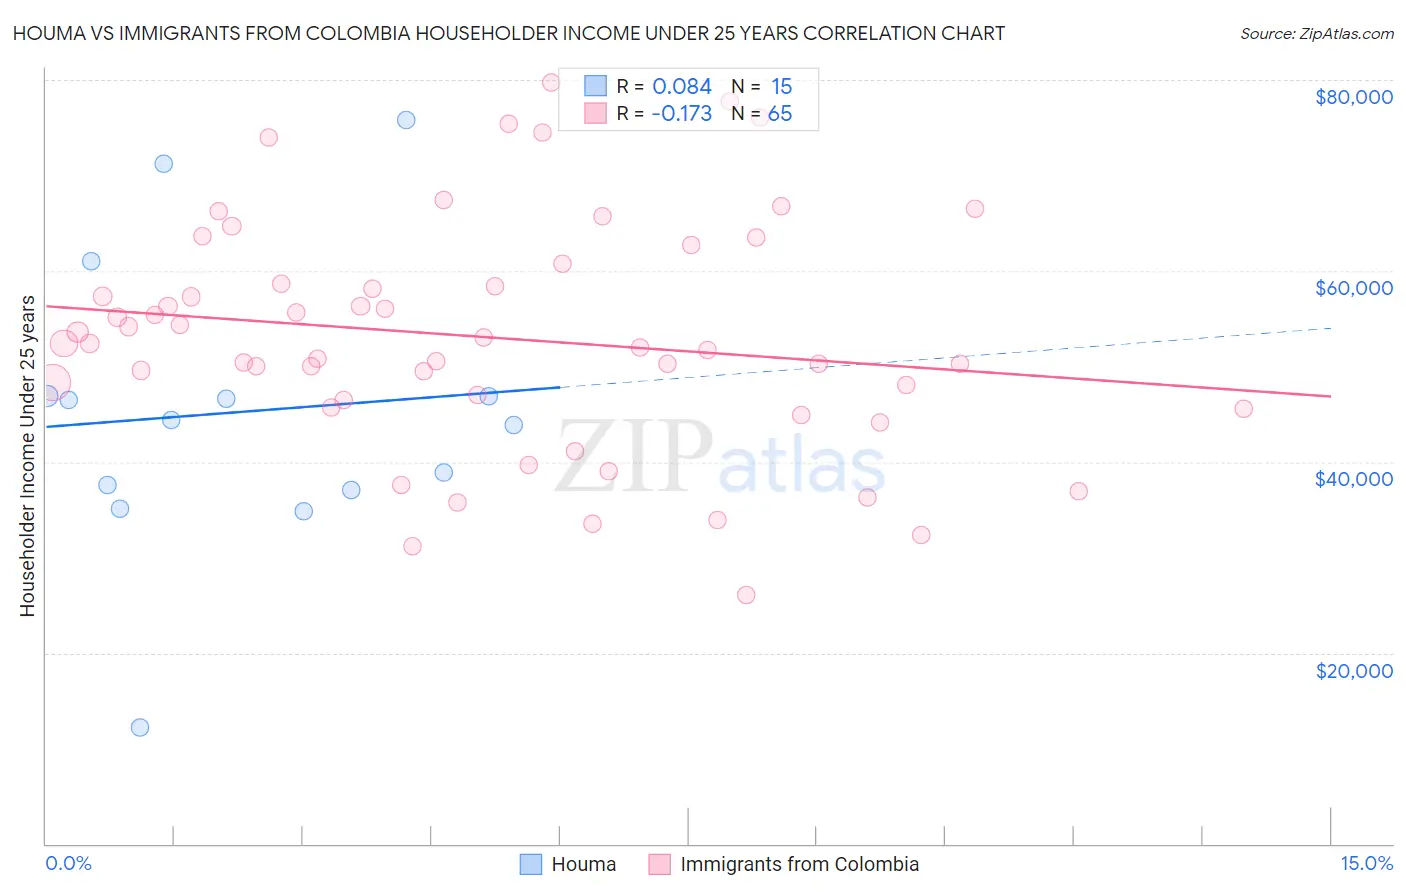 Houma vs Immigrants from Colombia Householder Income Under 25 years